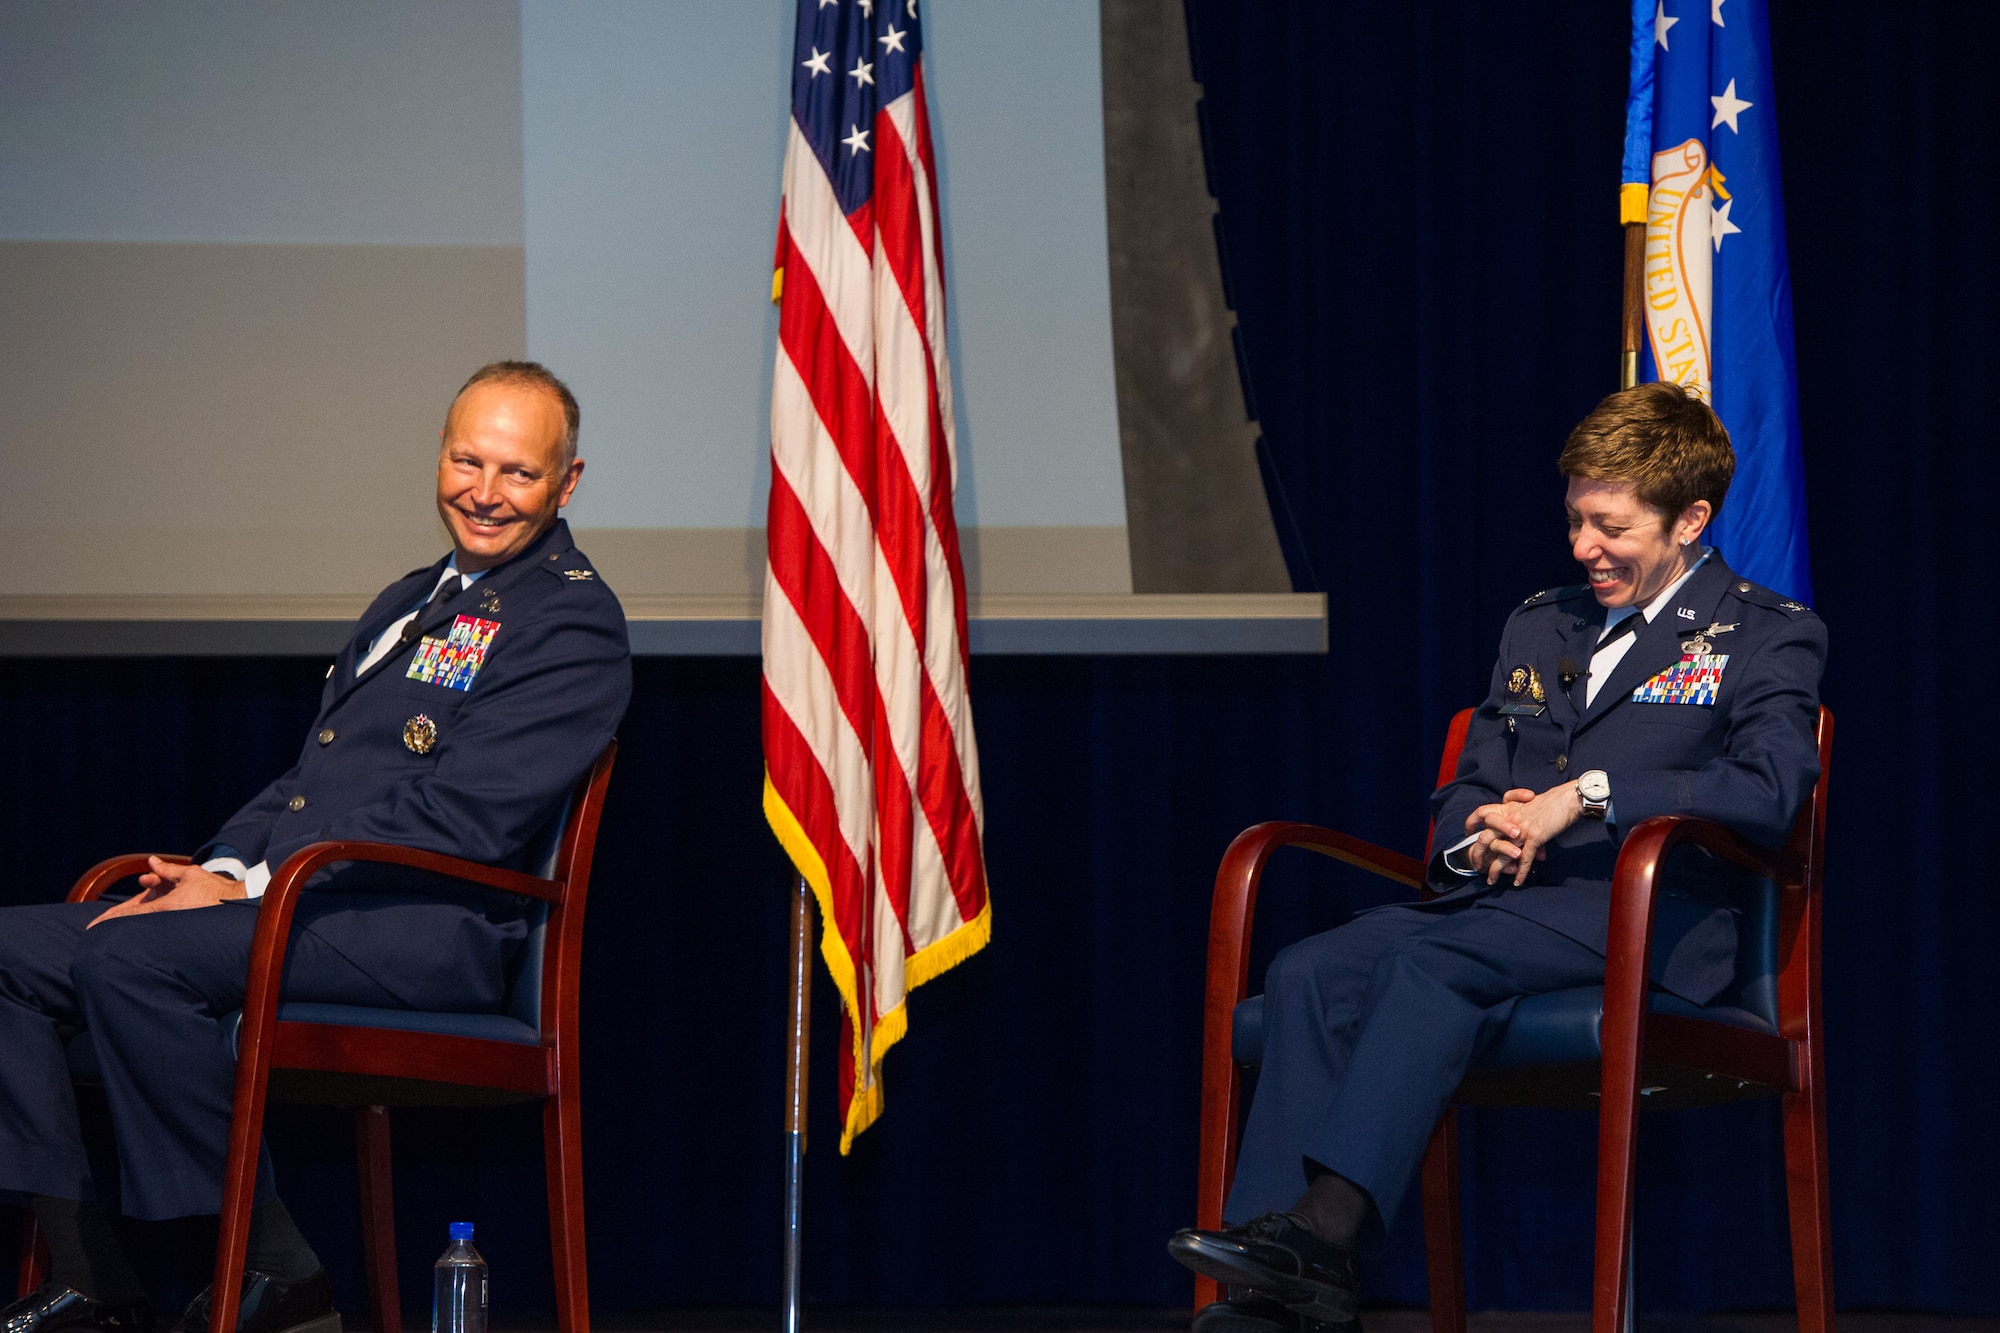 Outgoing commander Col. Chad Hartman (left) shares a laugh with incoming commander Col. Katharine Barber (right) during the Air Force Technical Applications Center’s Change of Command ceremony at Patrick AFB, Fla., June 30, 2020.  (U.S. Air Force photo by Amanda Ryrholm)